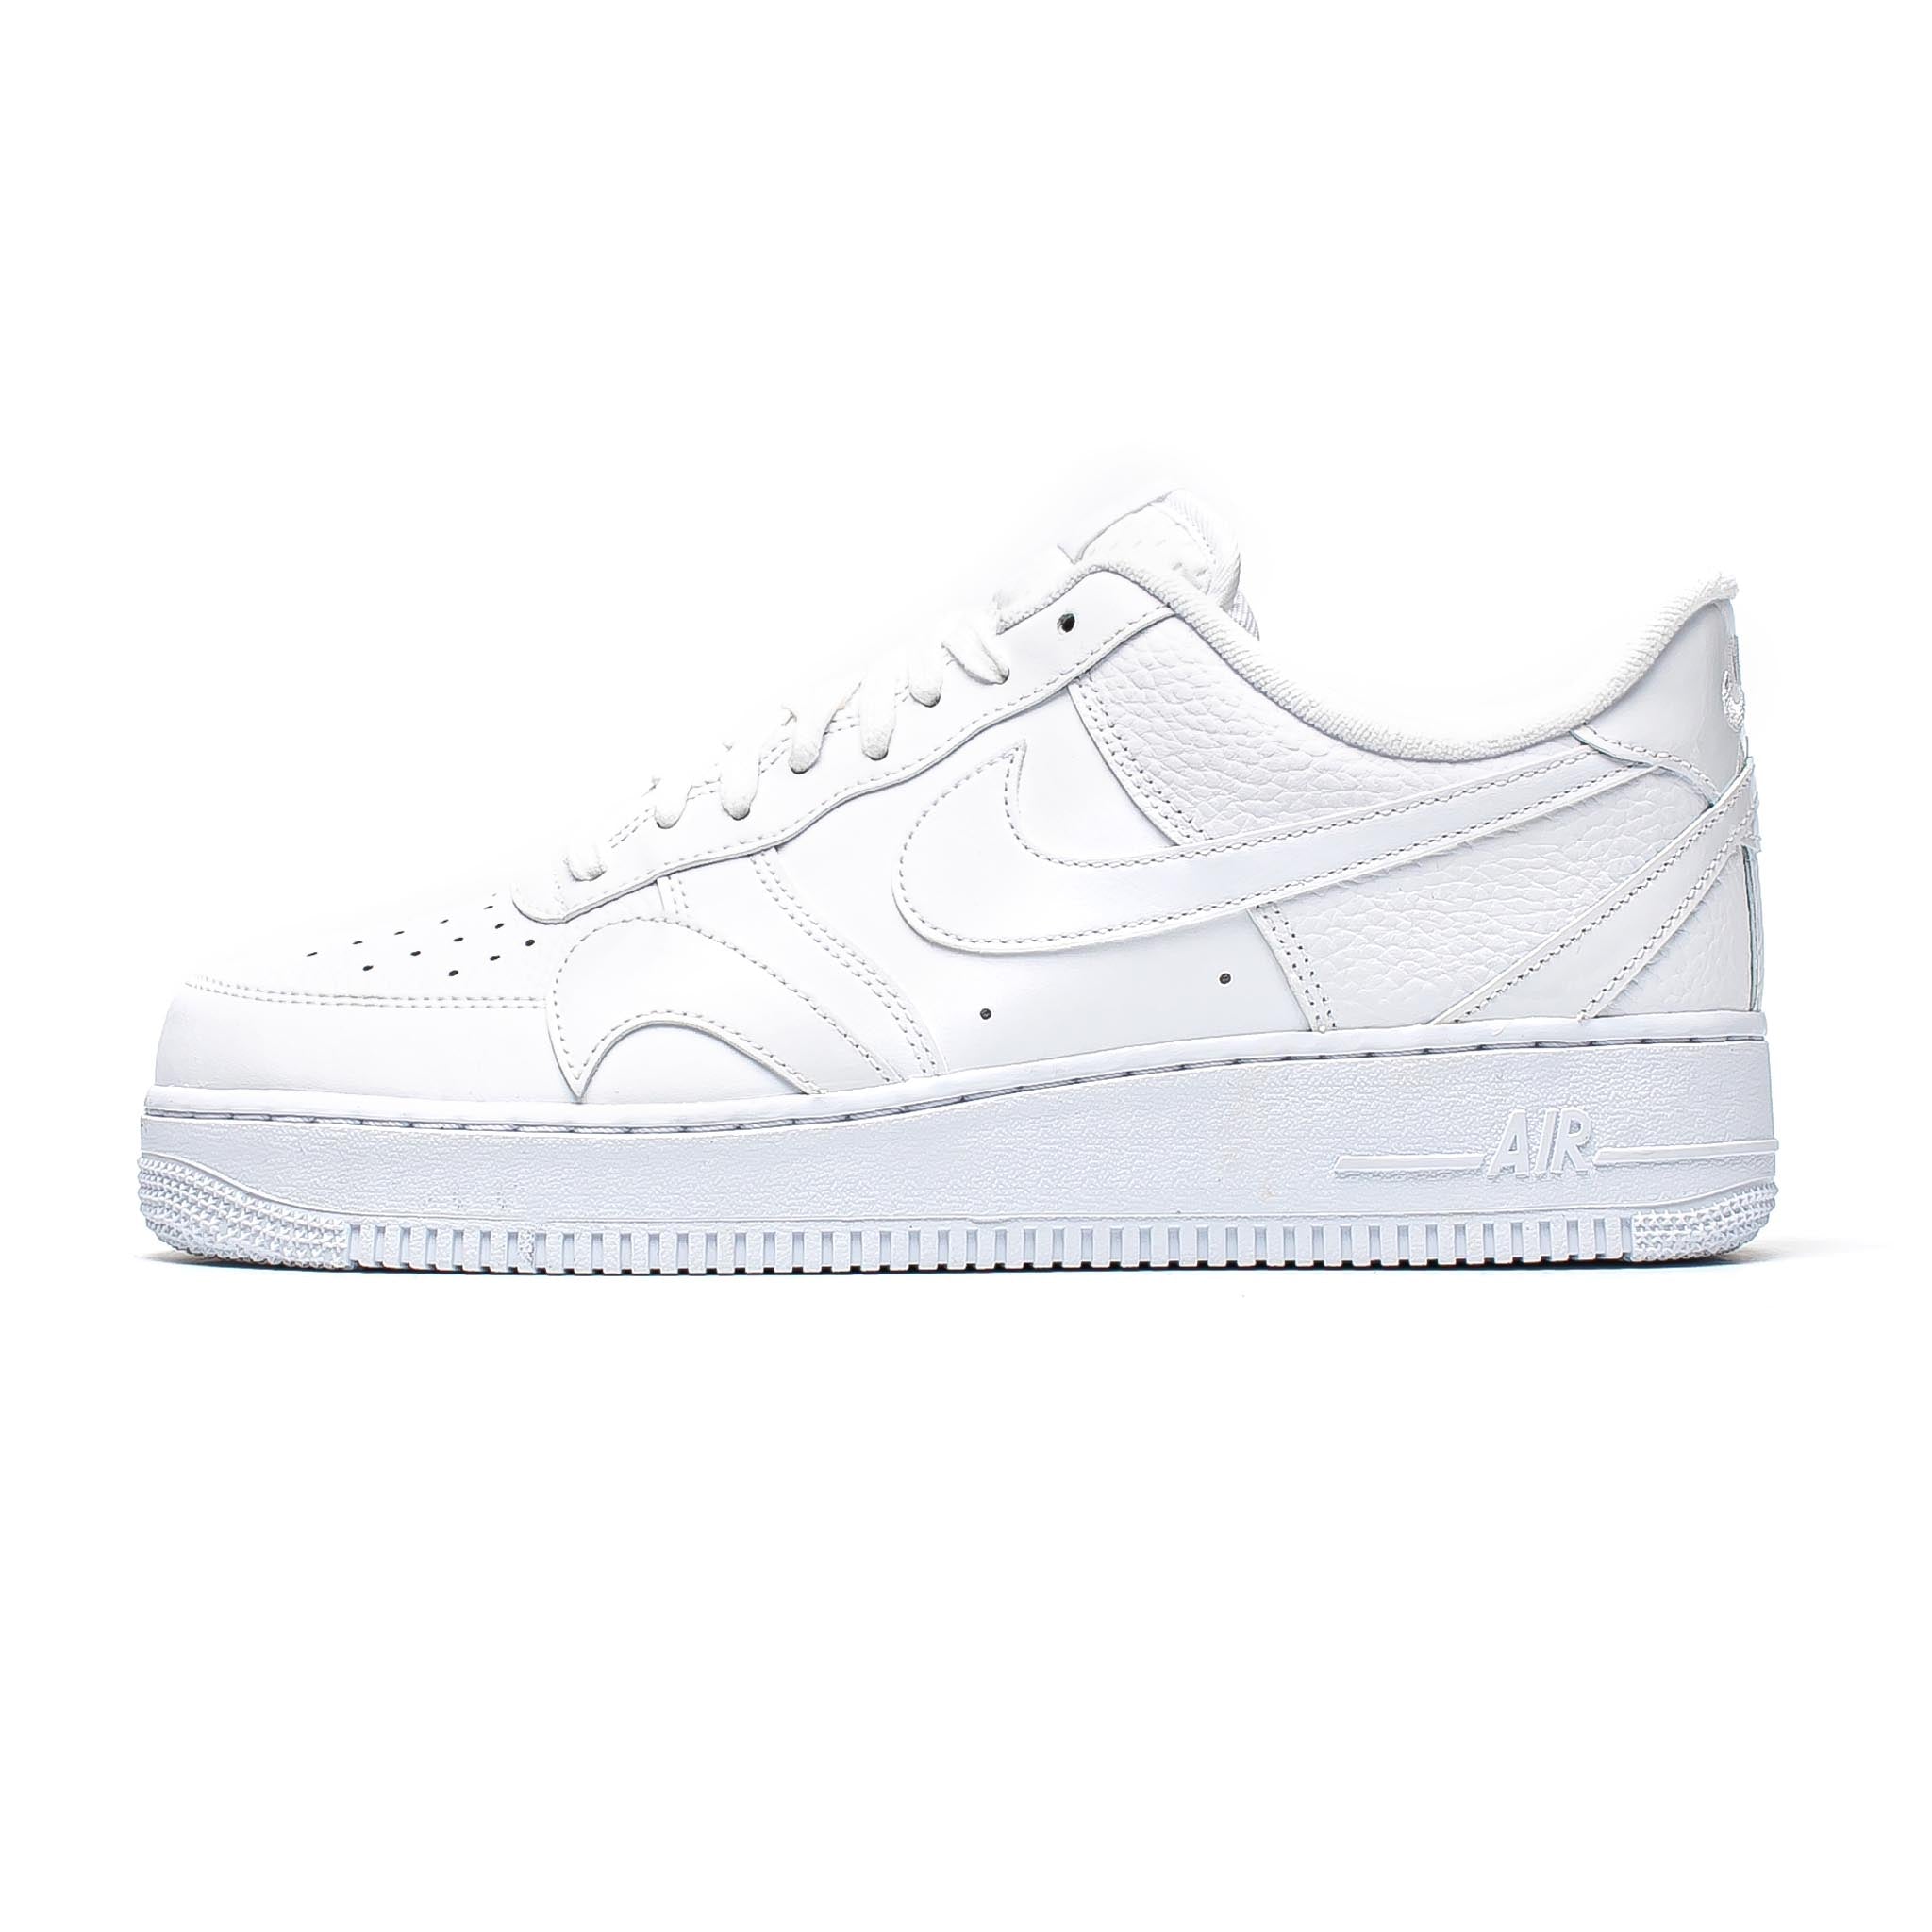 Buy Air Force 1 '07 LV8 'Misplaced Swoosh - Triple White' - CK7214 100